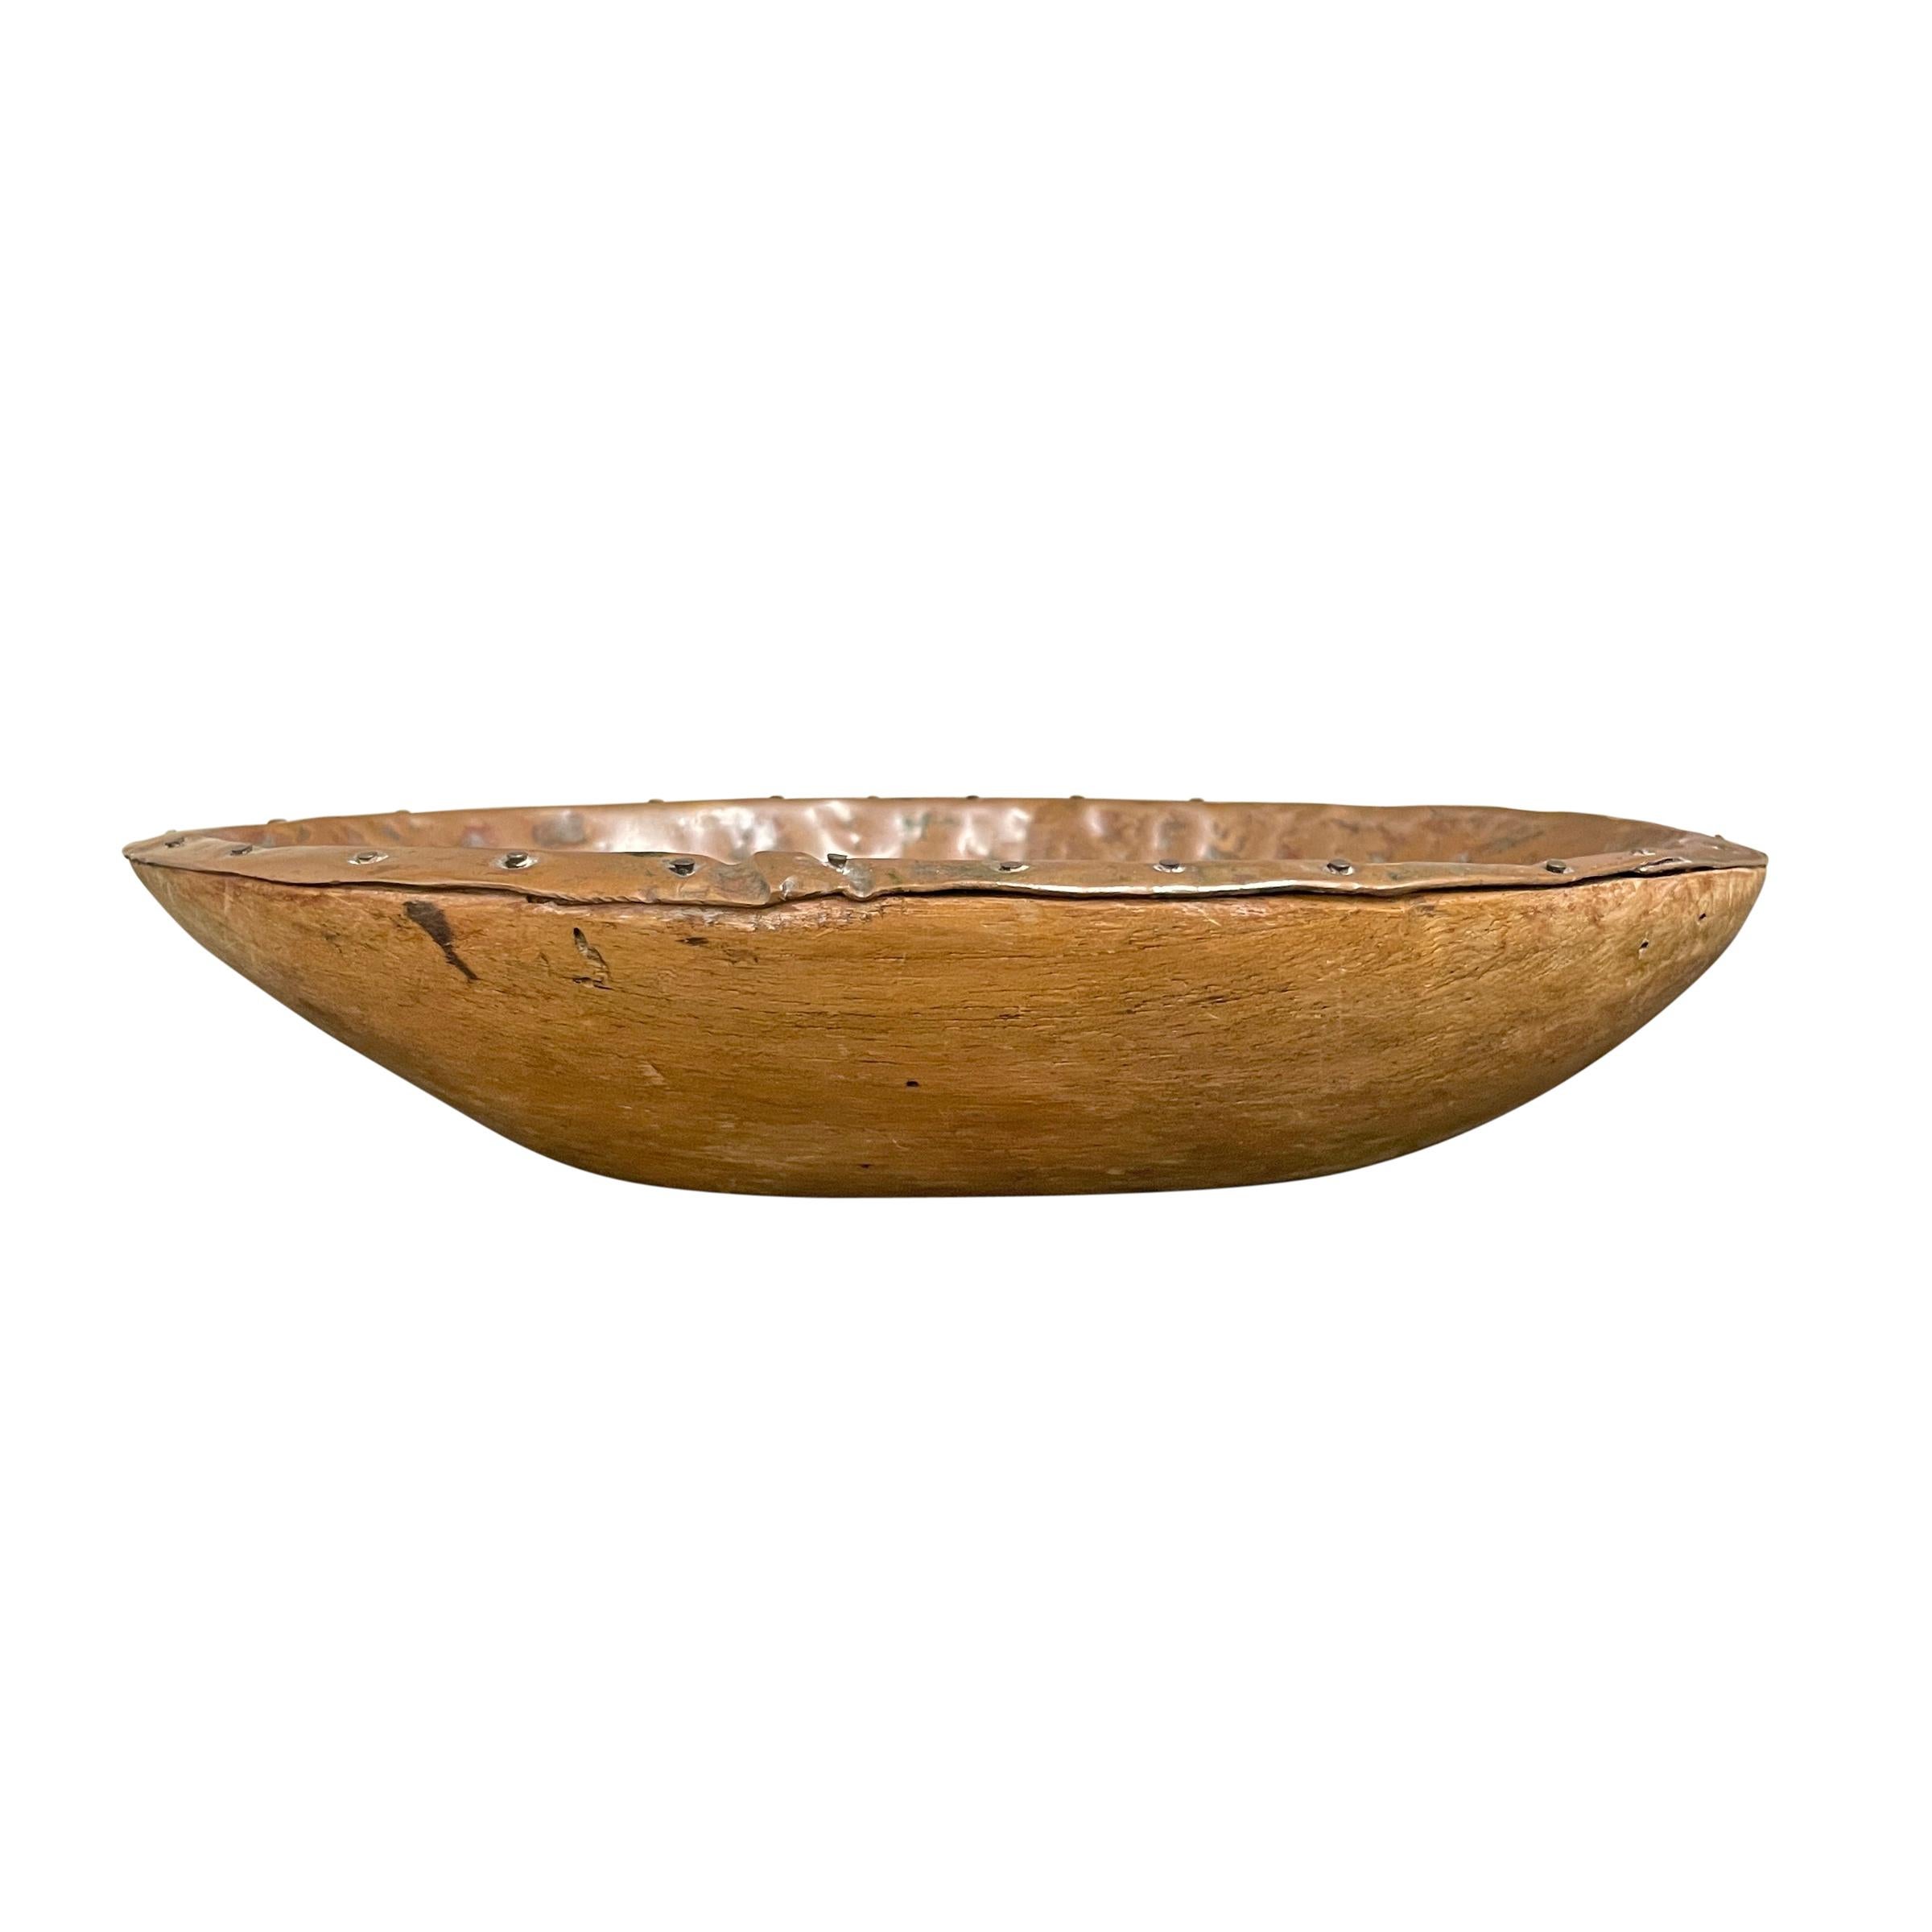 20th Century American Hammered Copper Bowl 2